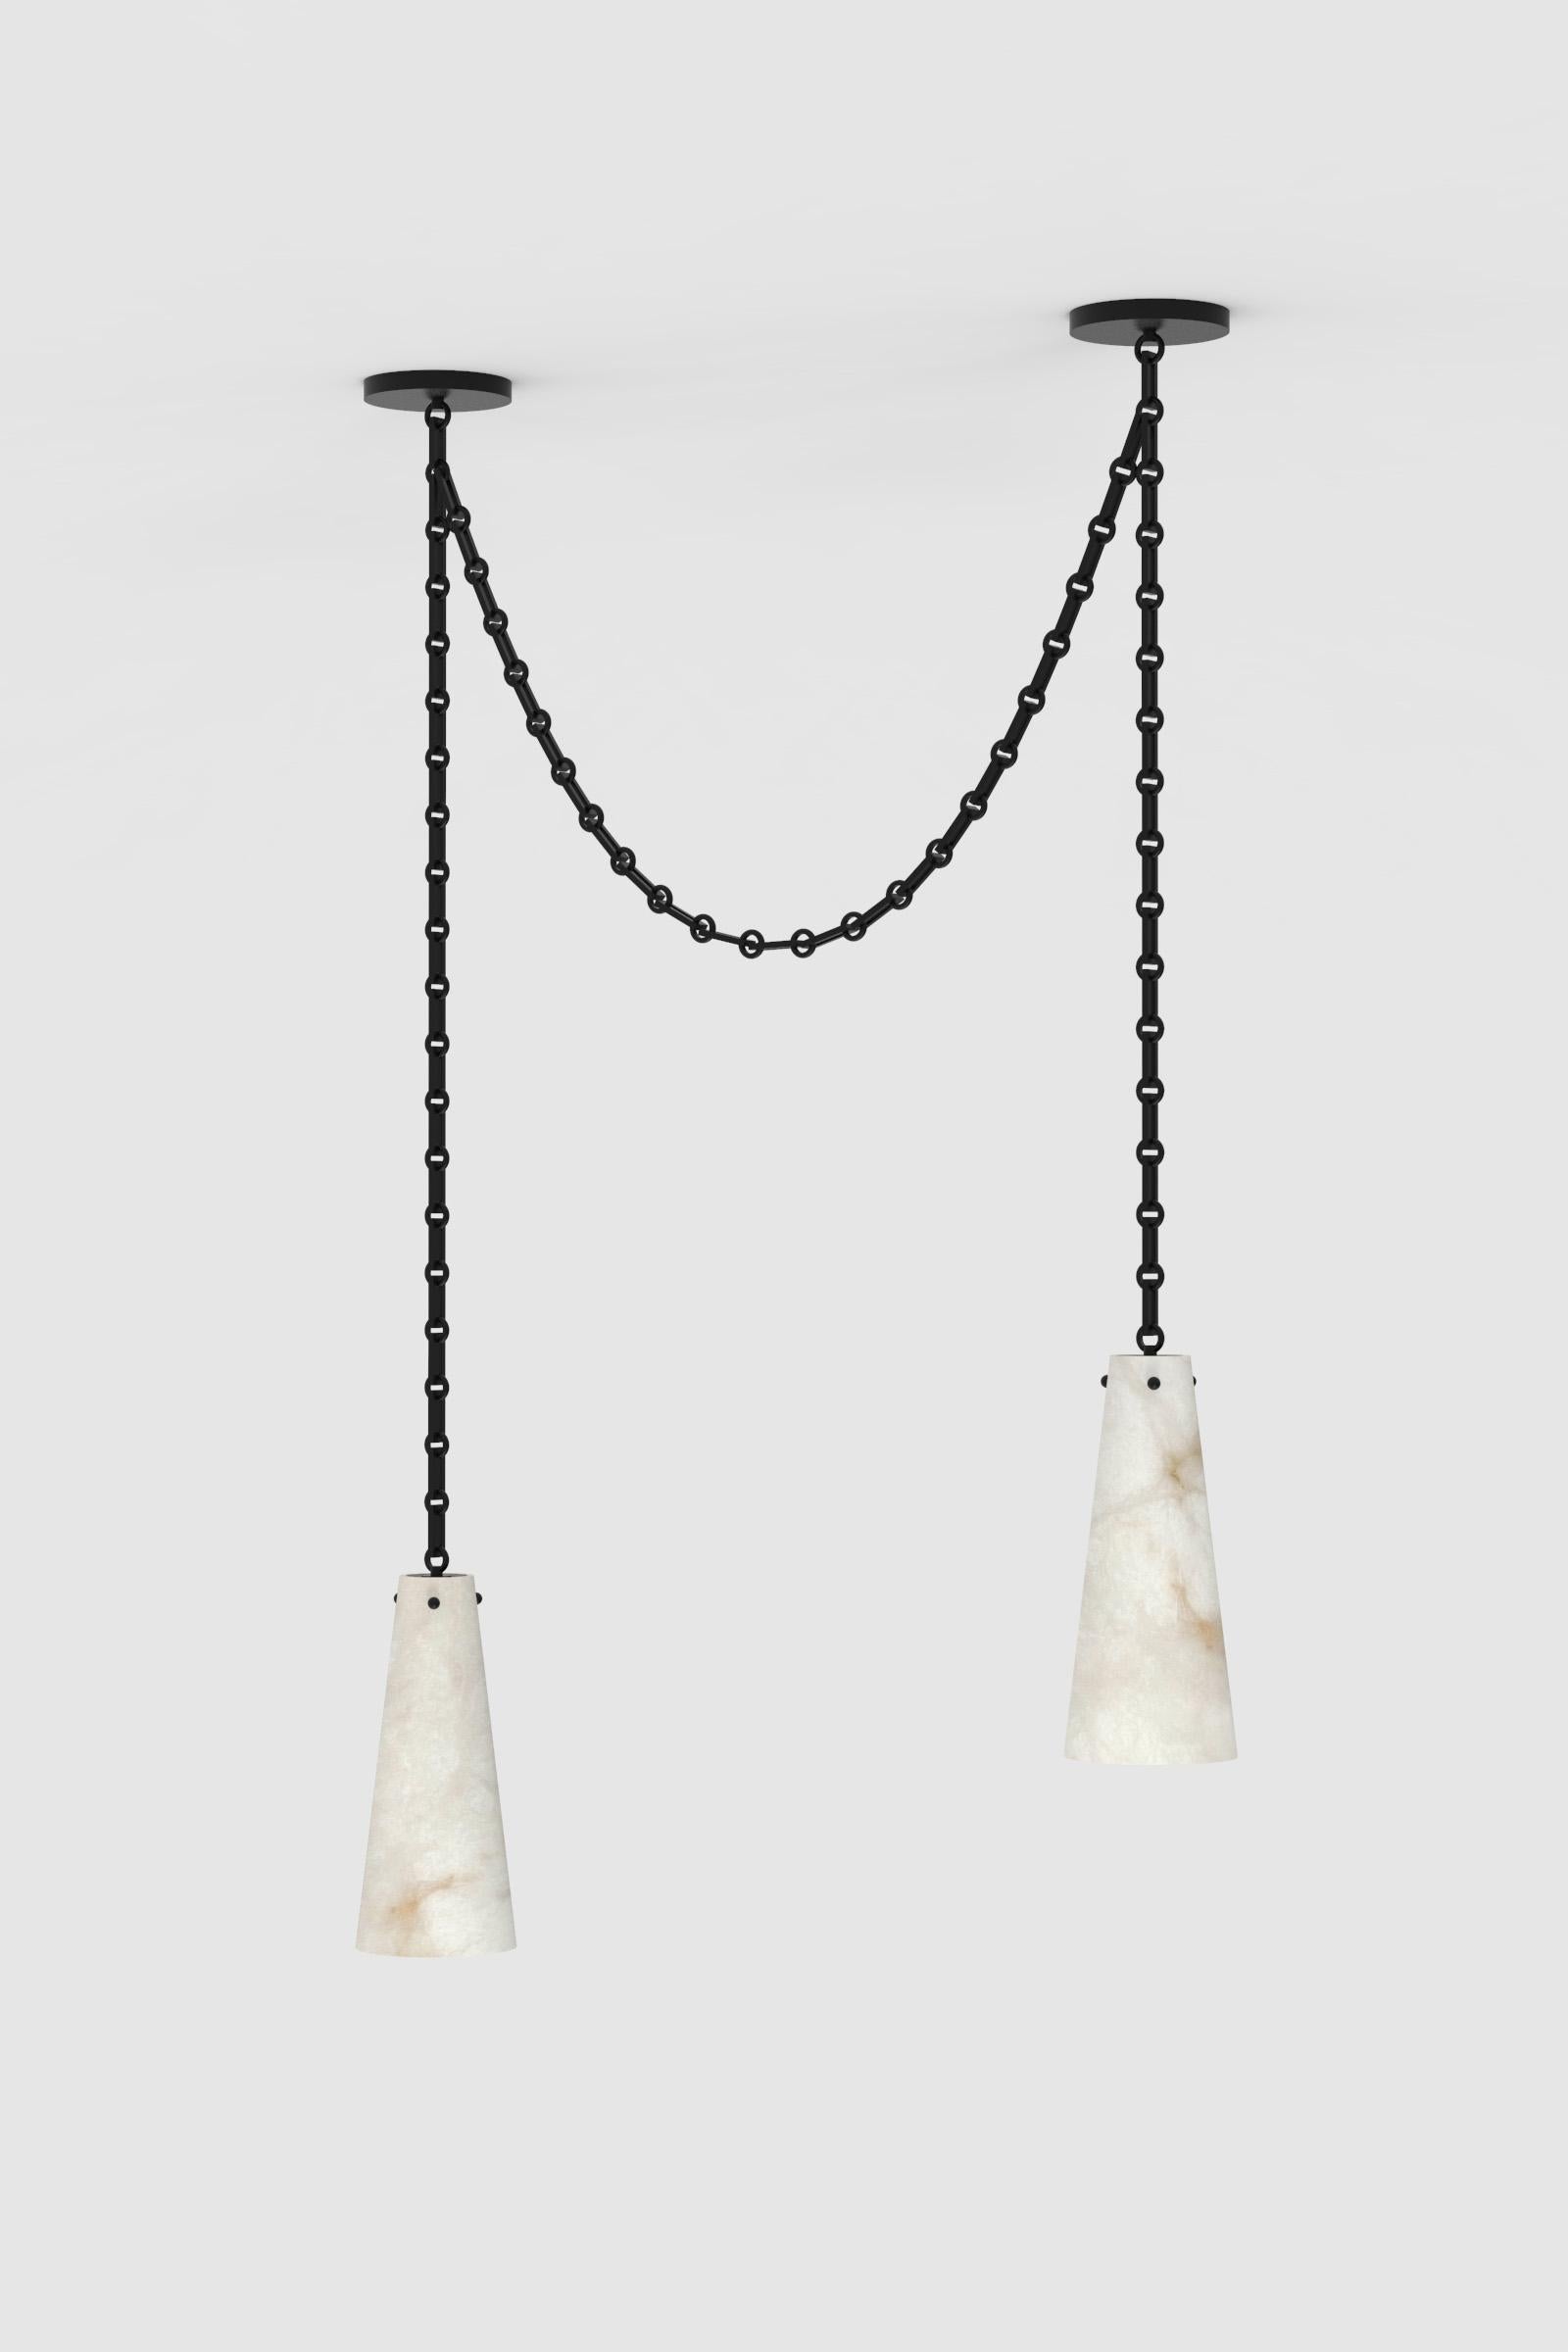 Post-Modern Contemporary Lucca Double Pendant 202A-1S in Alabaster by Orphan Work, 2021 For Sale